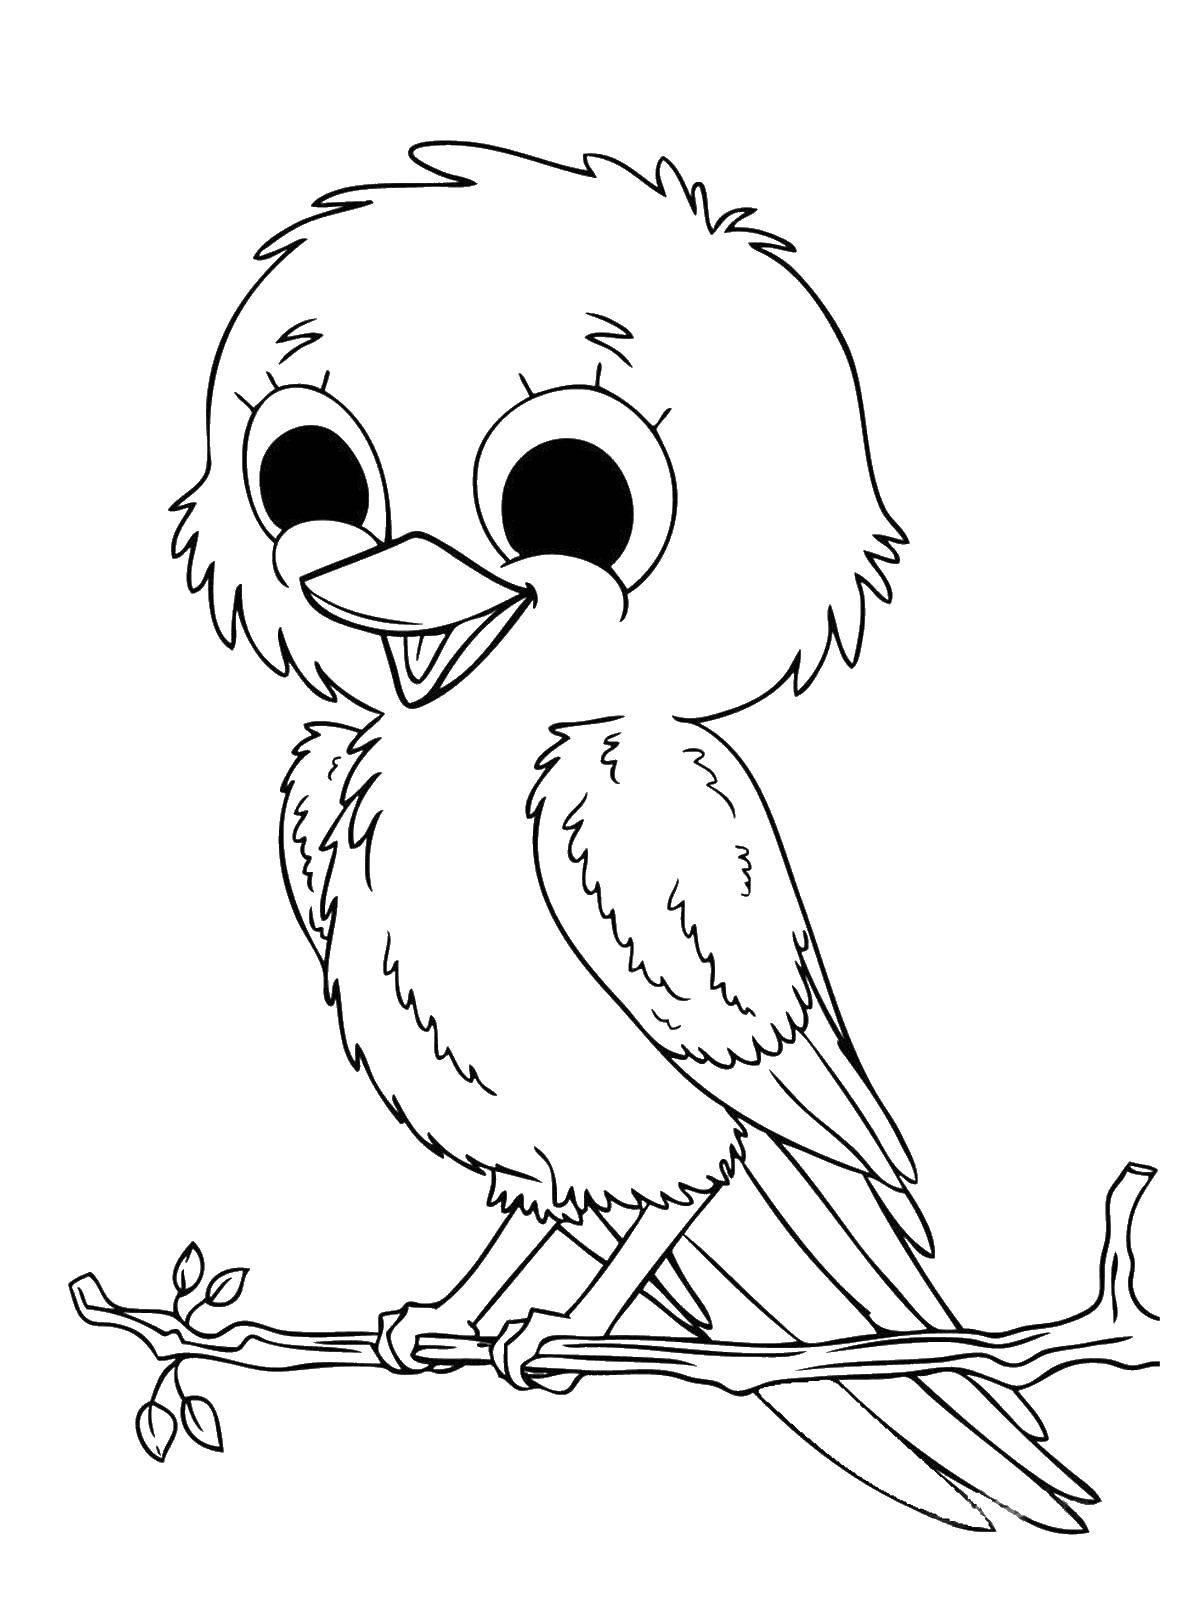 Coloring Cheerful bird sitting on a branch. Category birds. Tags:  Birds.